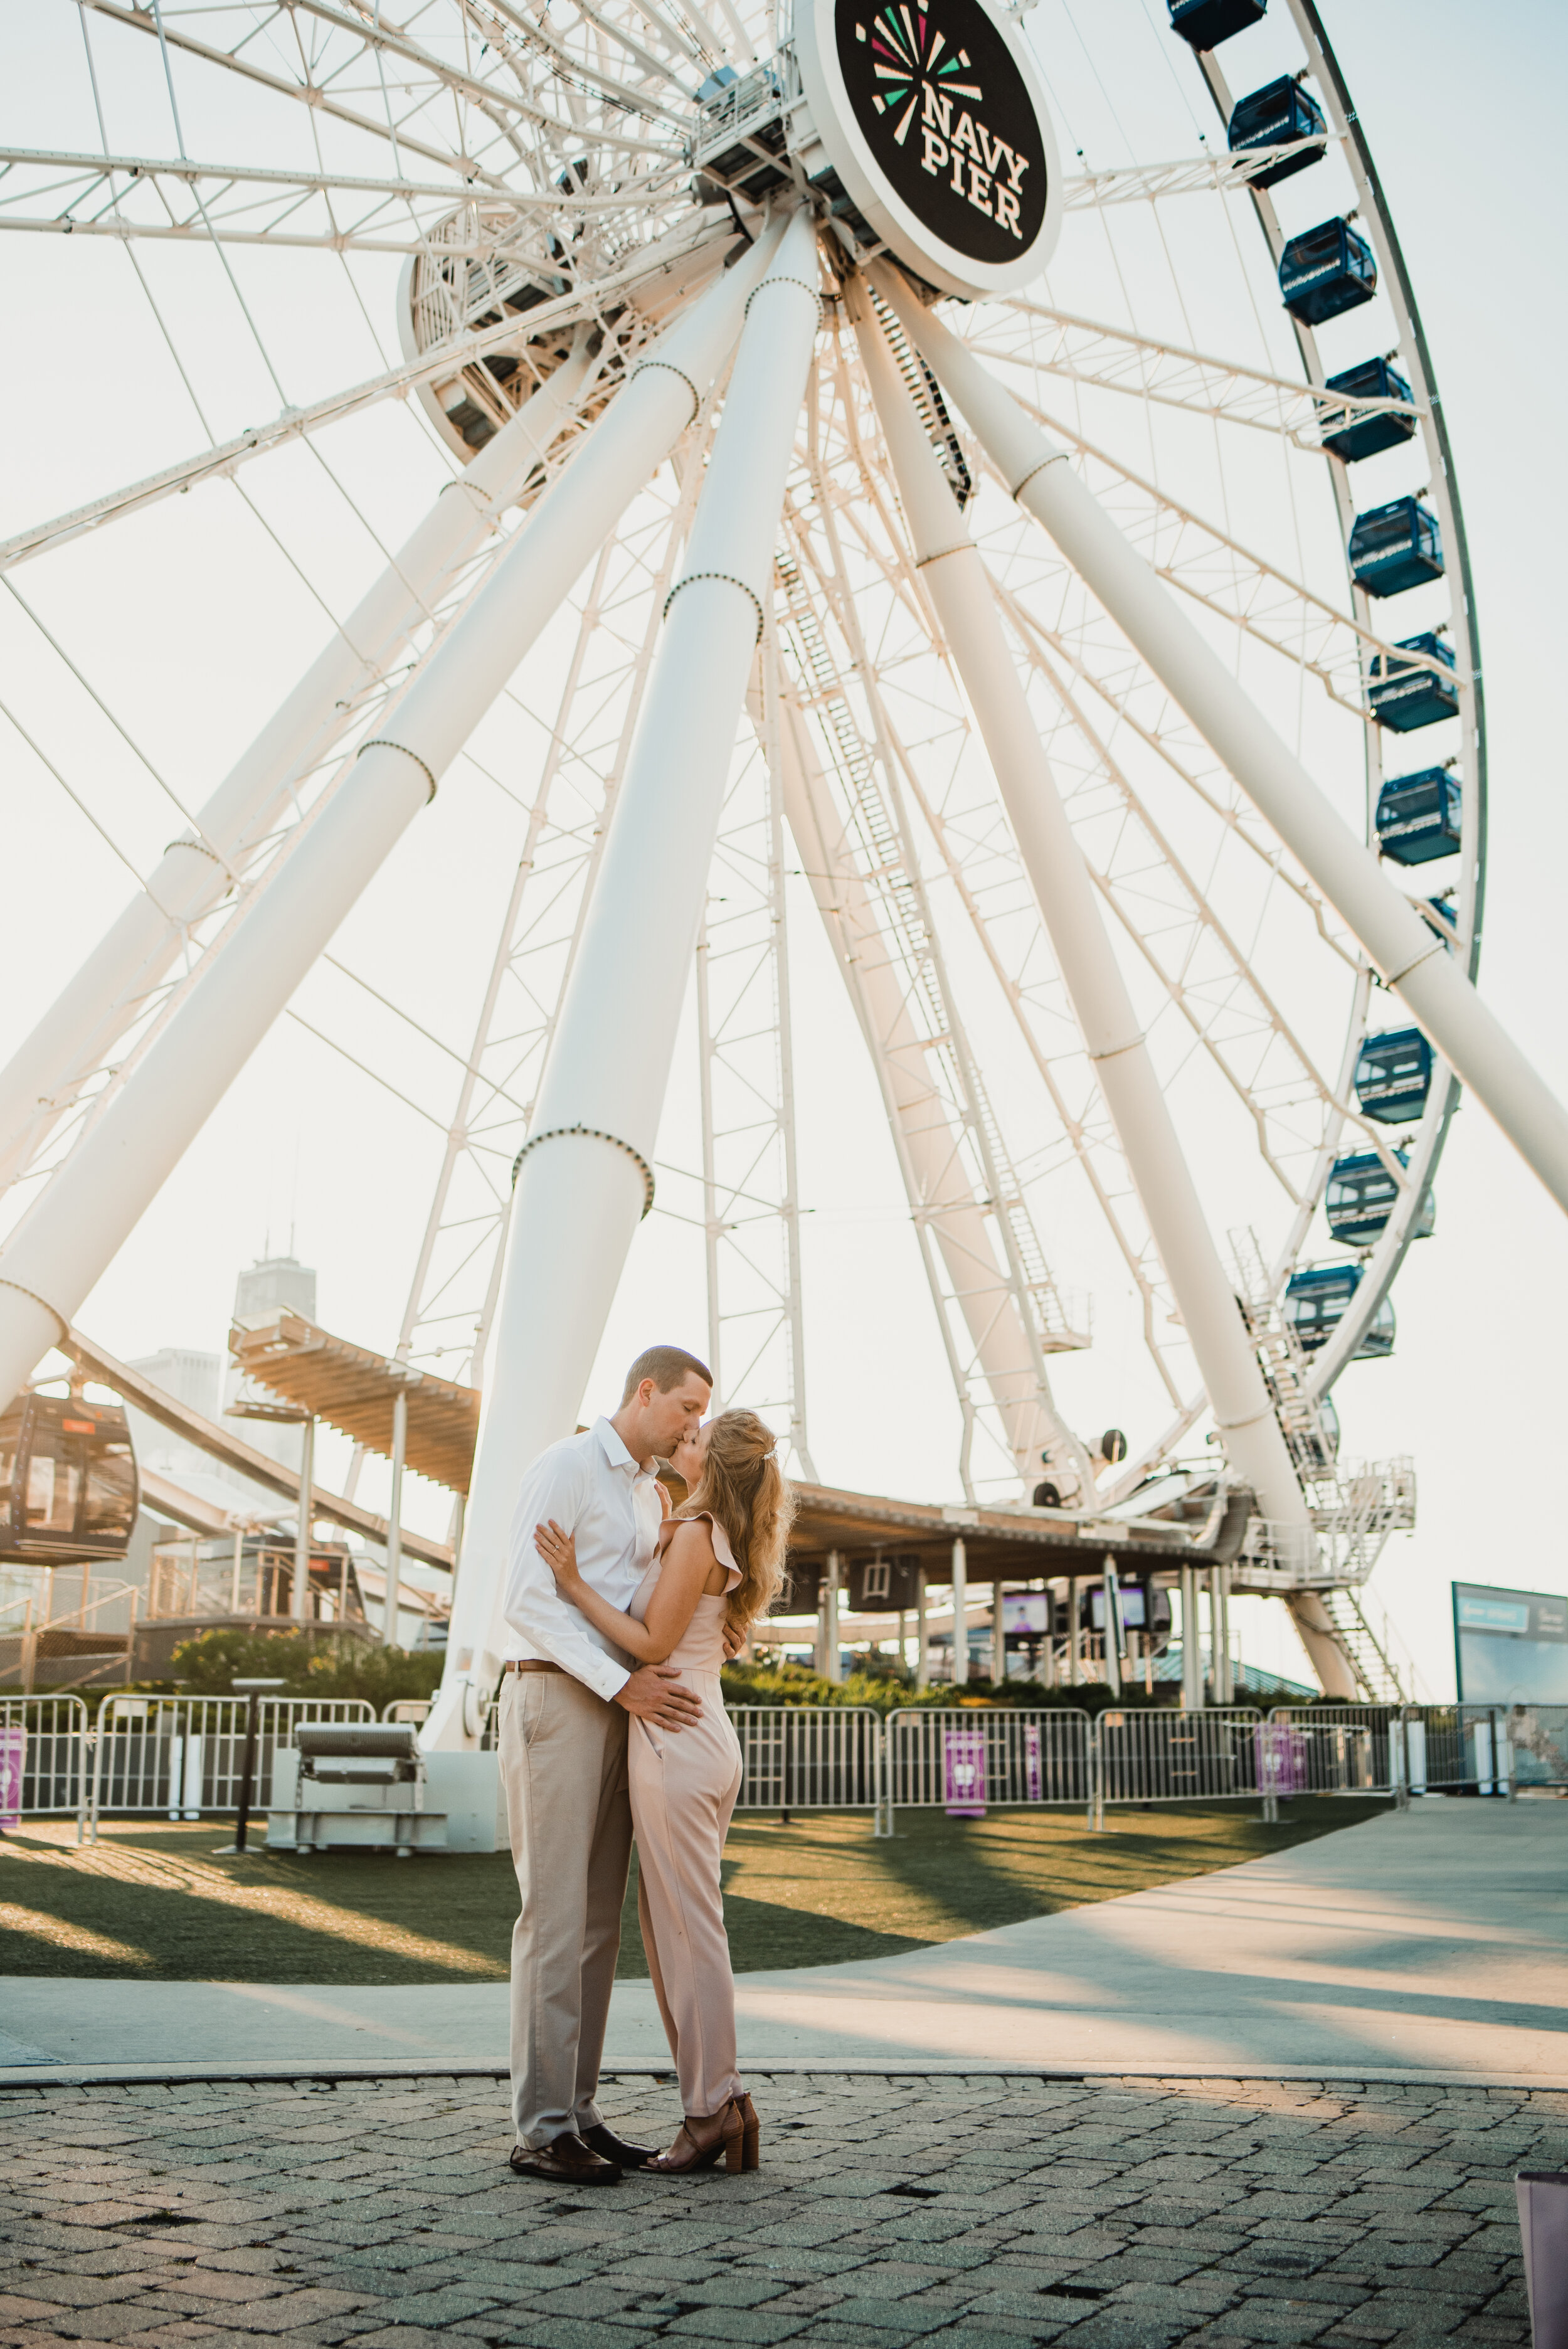 Charming Downtown Chicago Engagement Session captured by Dana Bell Photography